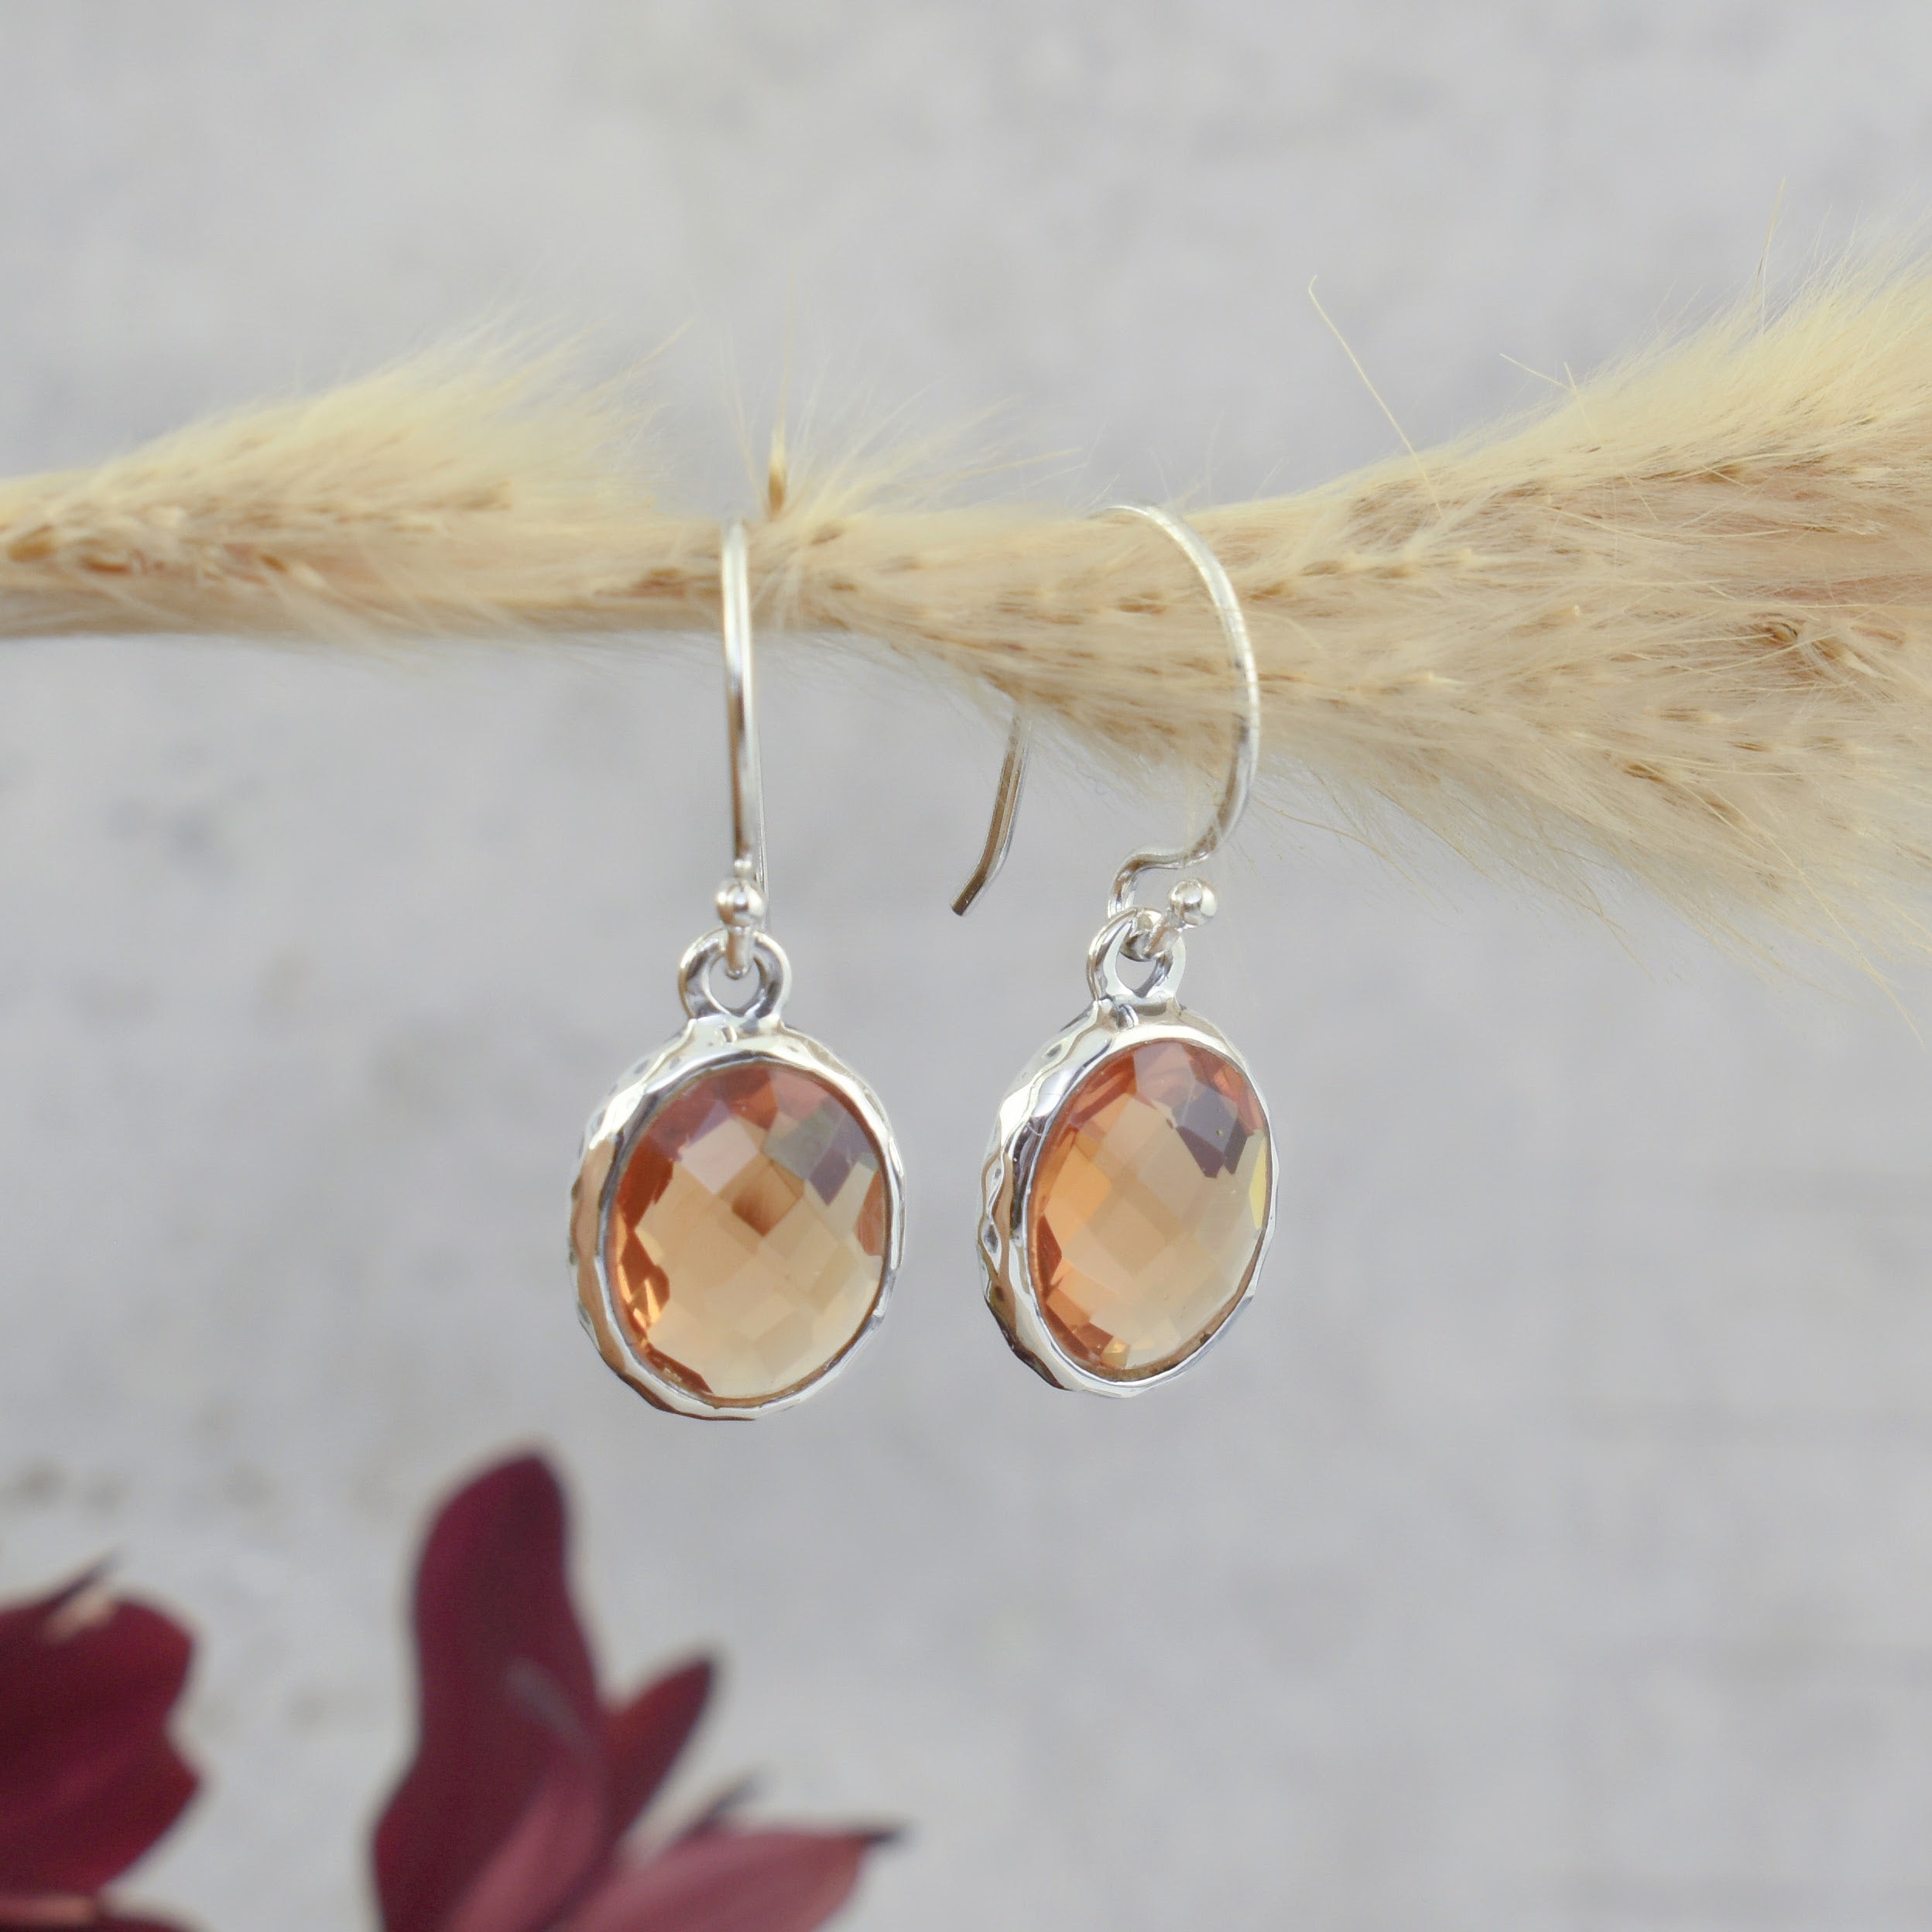 .925 sterling silver dangling earrings with an amber colored stone